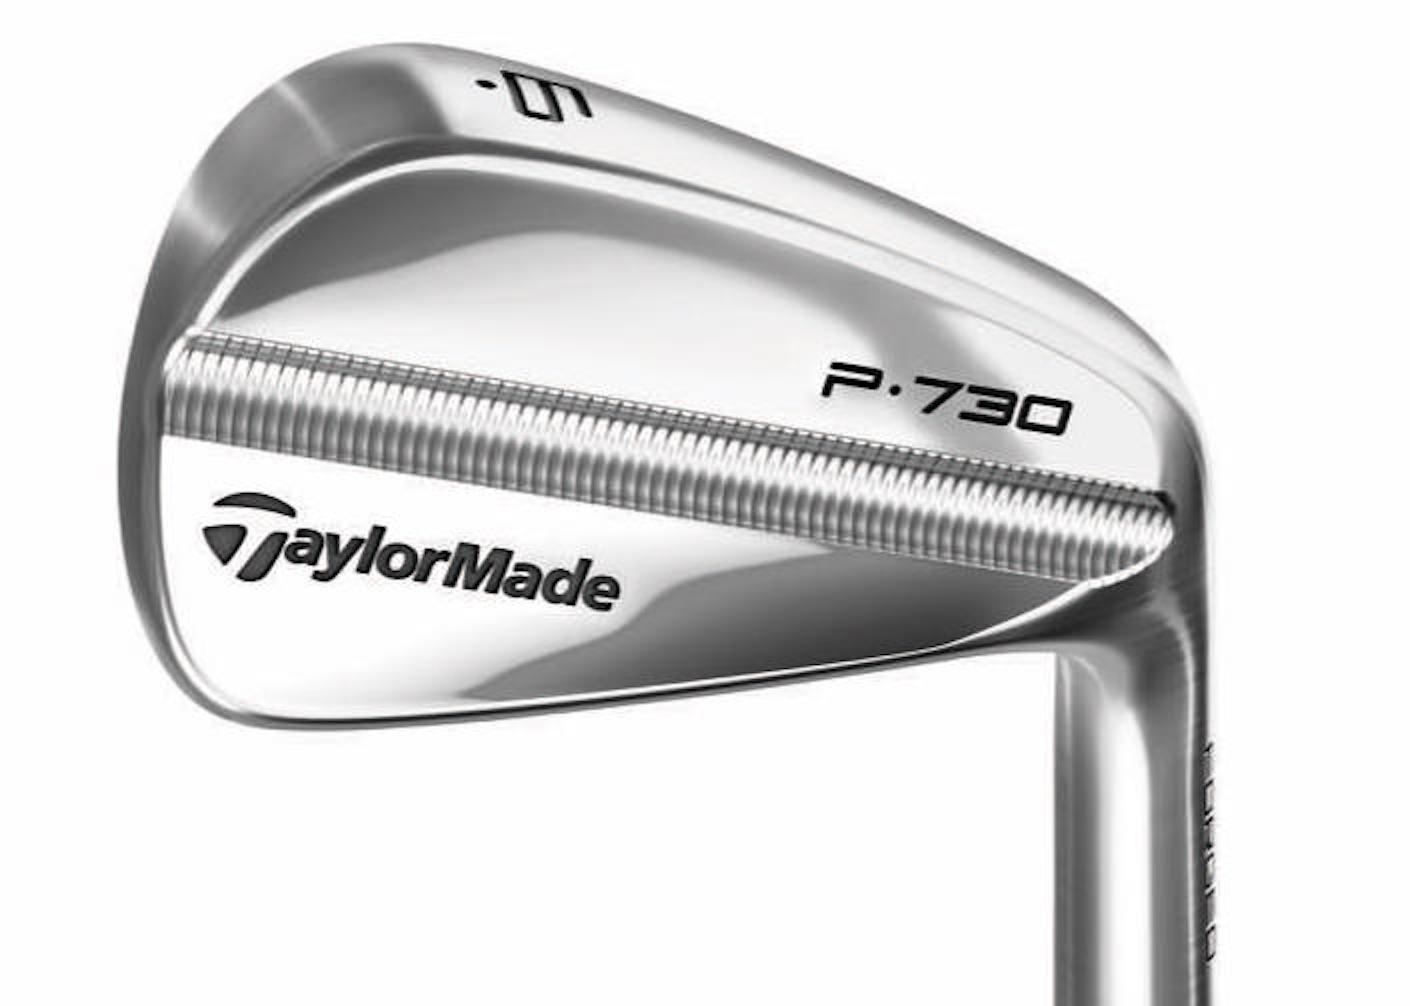 TaylorMade P730